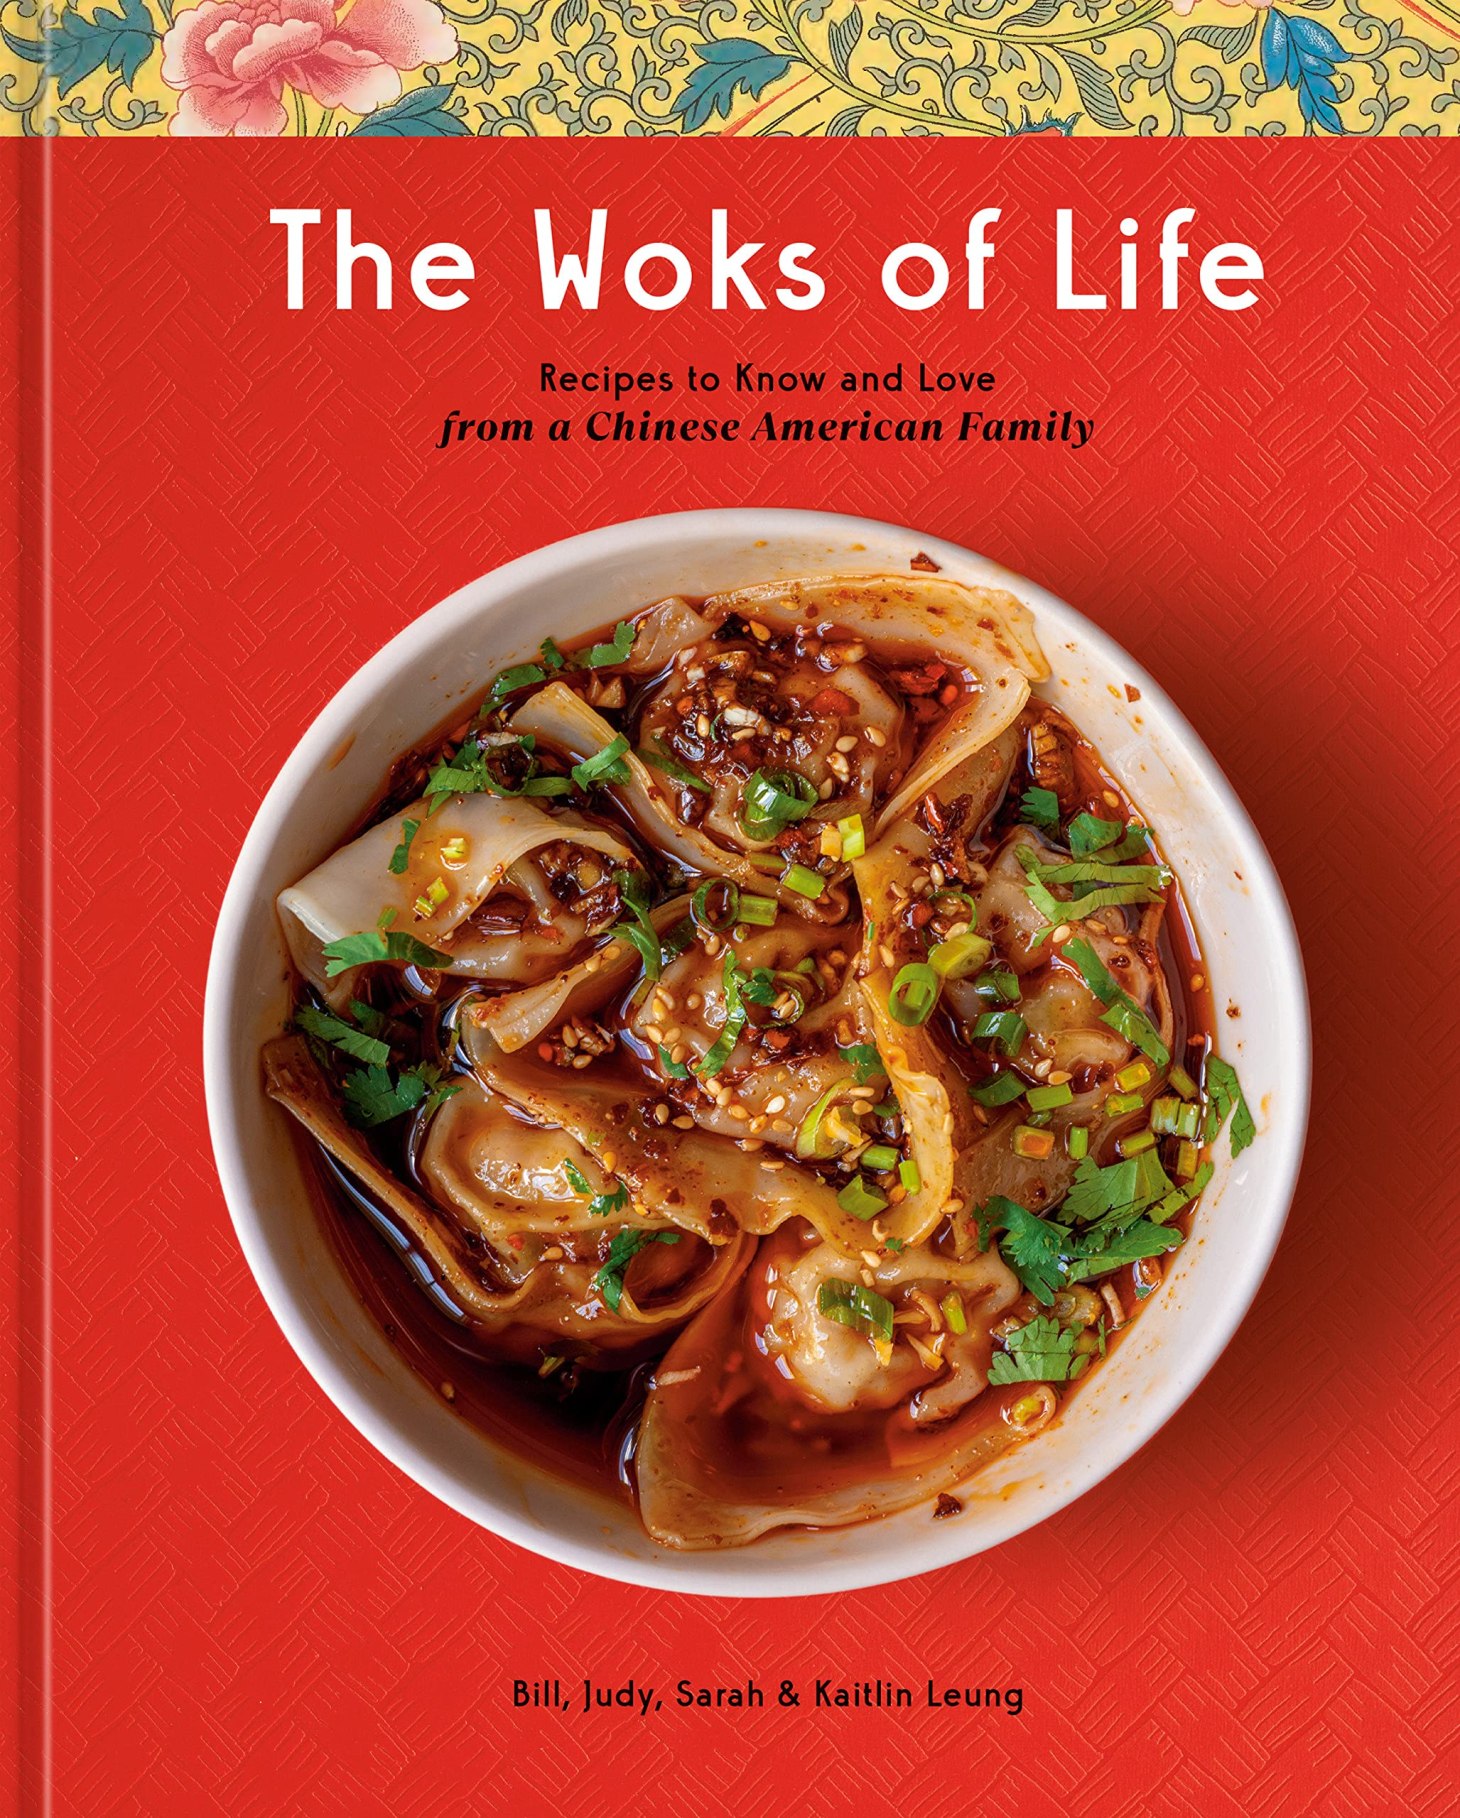 the woks of life by the leung family, a mother's day food gift